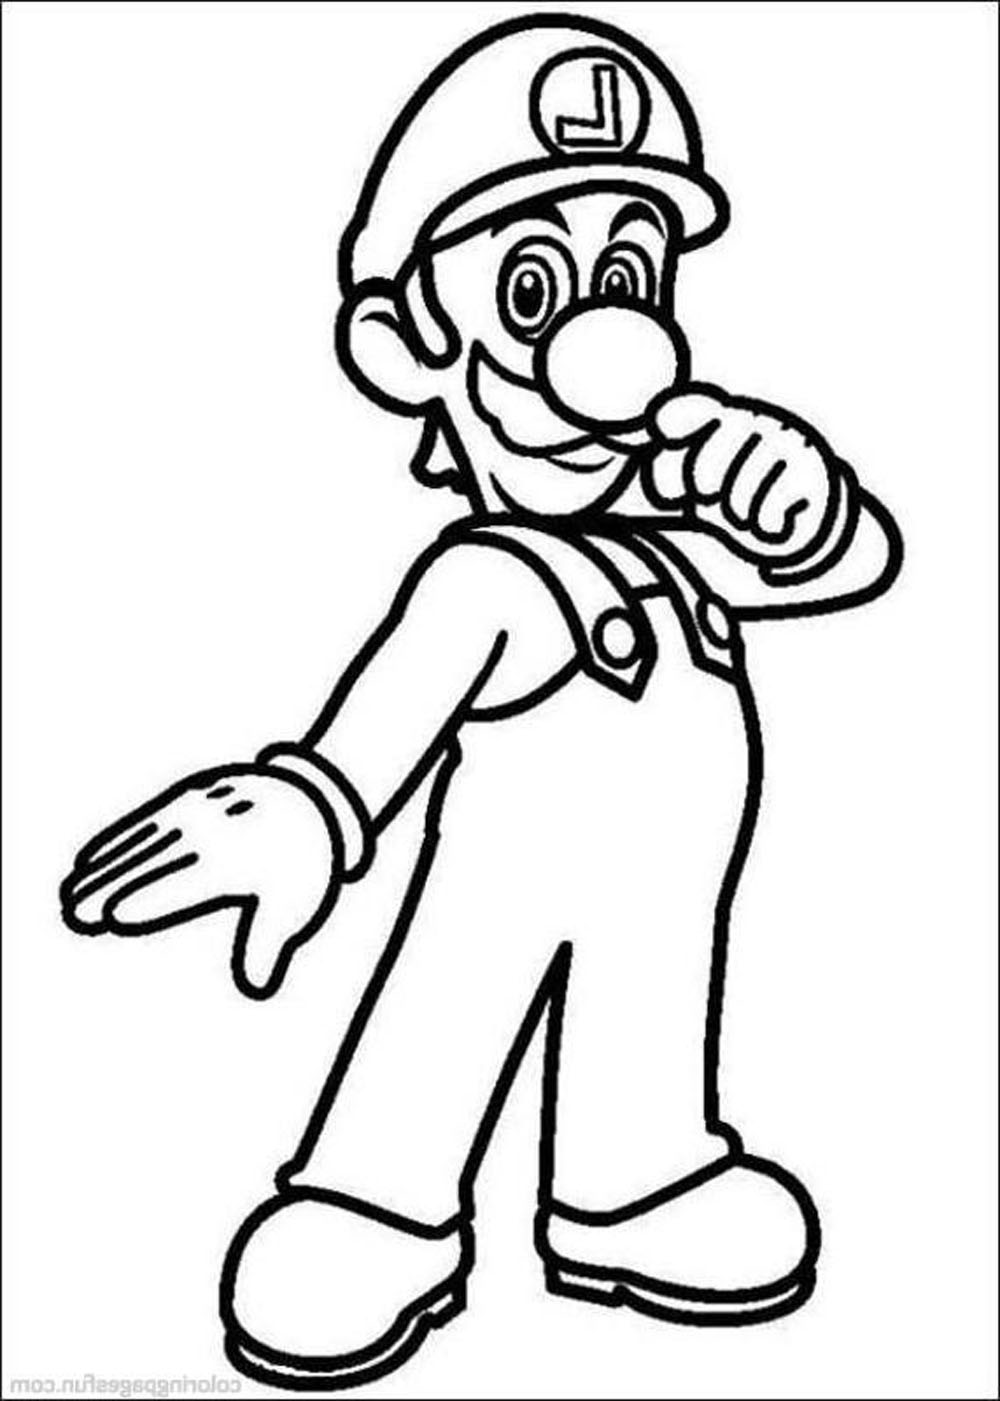 print-download-mario-coloring-pages-themes